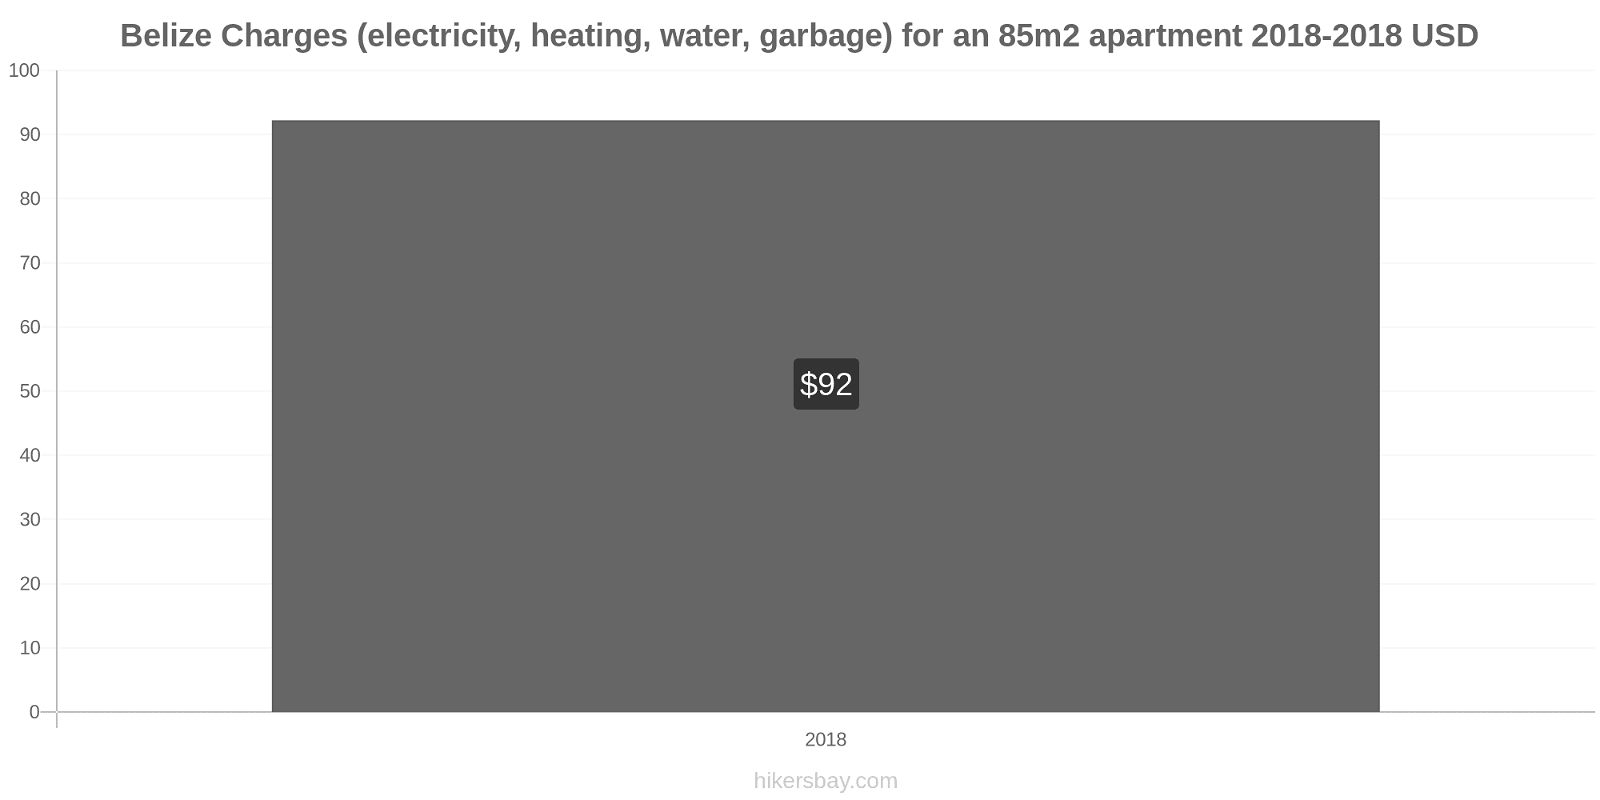 Belize price changes Utilities (electricity, heating, water, garbage) for an 85m2 apartment hikersbay.com